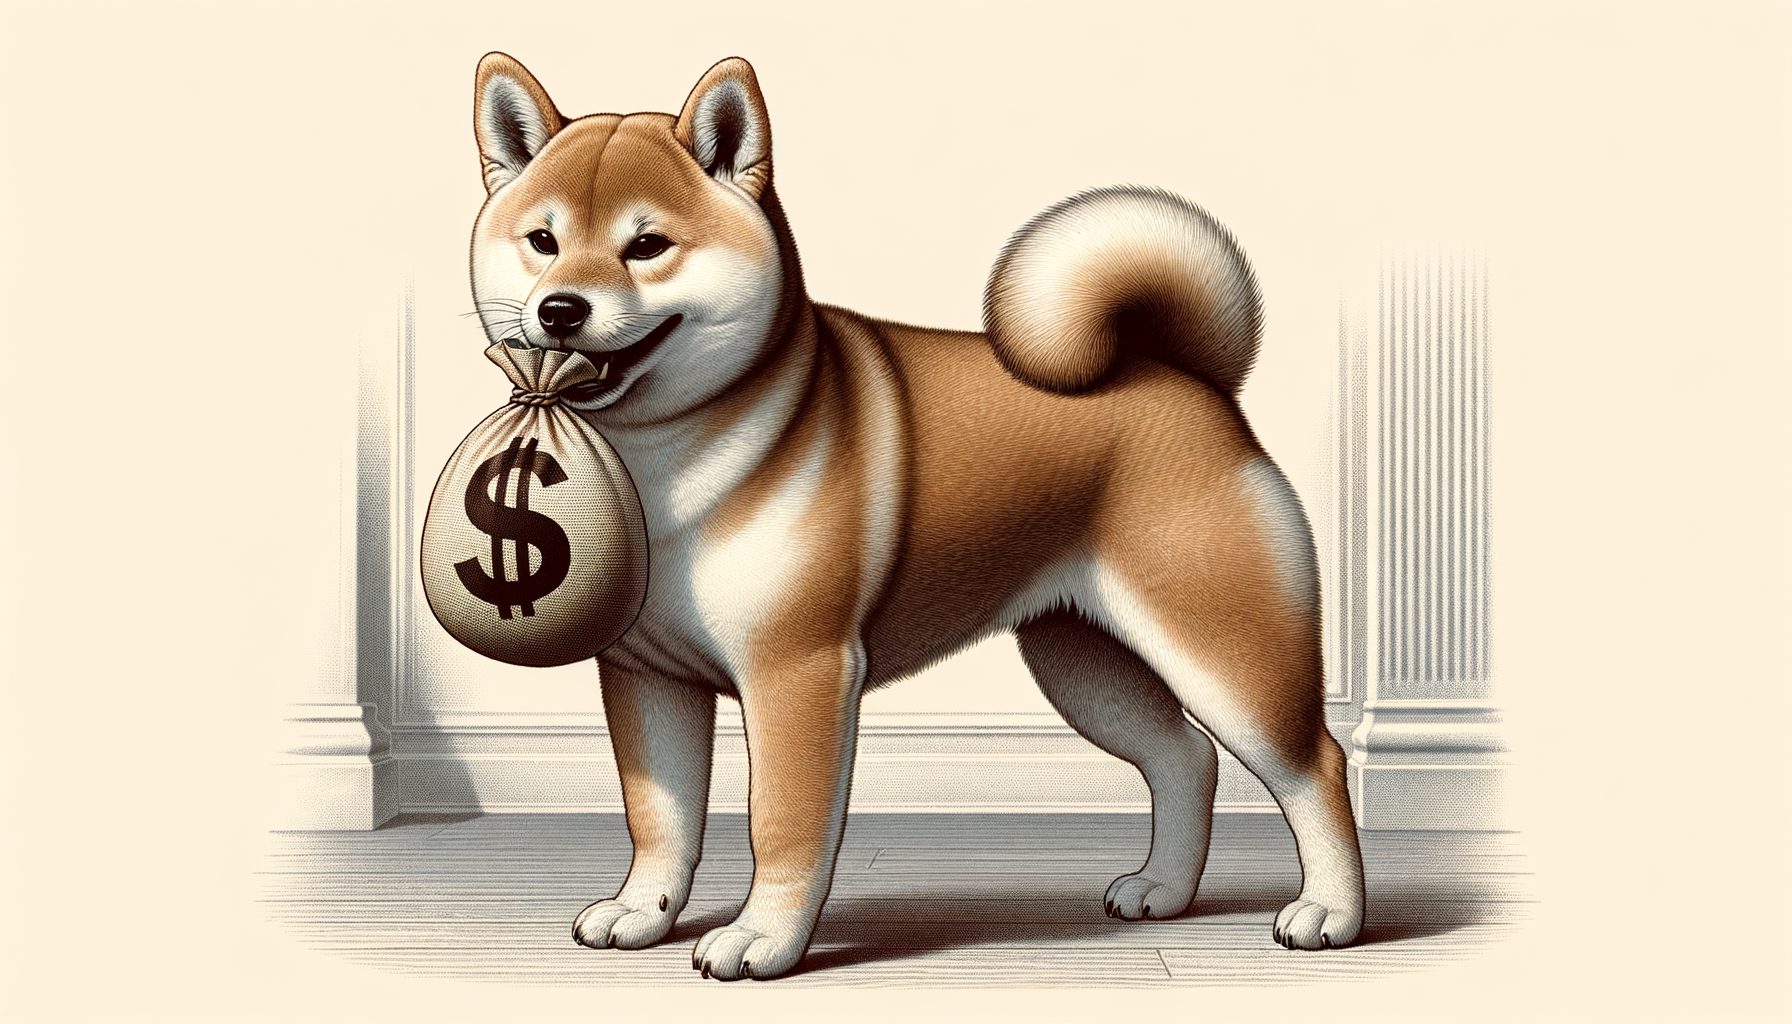 How Much SHIB Does Shiba Inu Founder Hold?